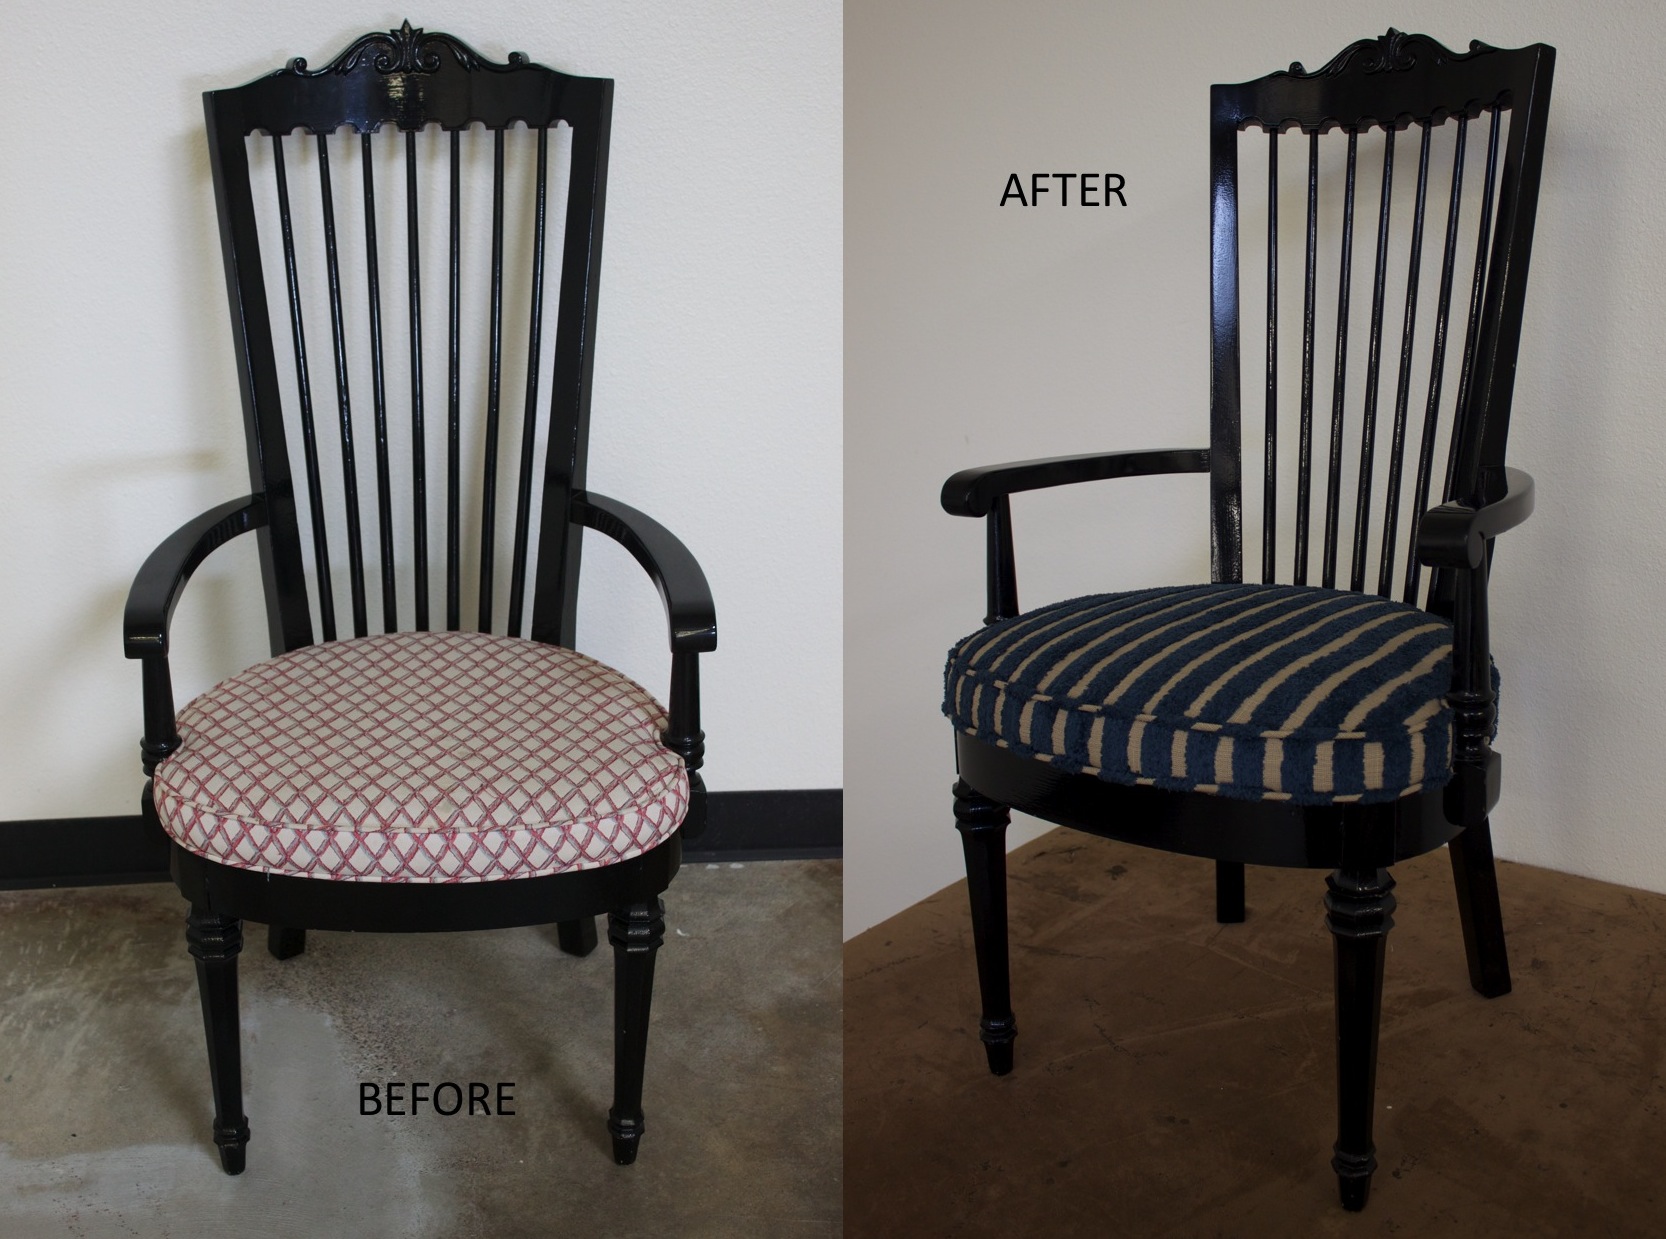 Black Wooden Chair Before & After